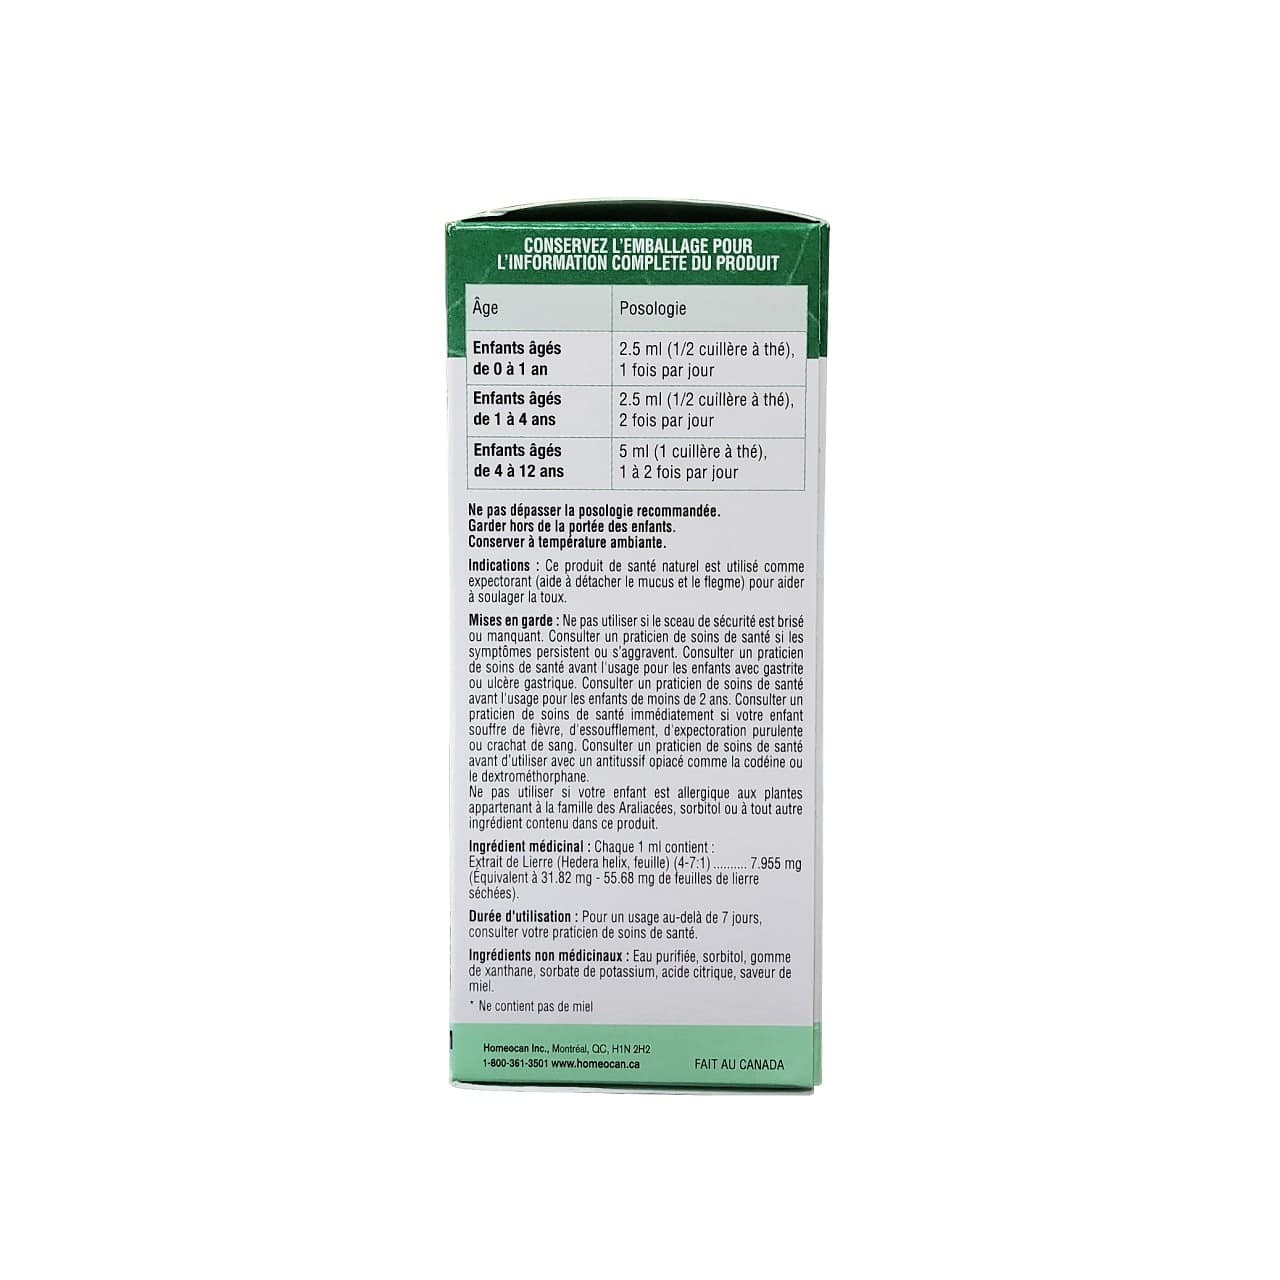 Duraction, indications, warnings, and ingredients for Homeocan Kids 0-9 Cough and Cold Herbal Syrup (100 mL) in French